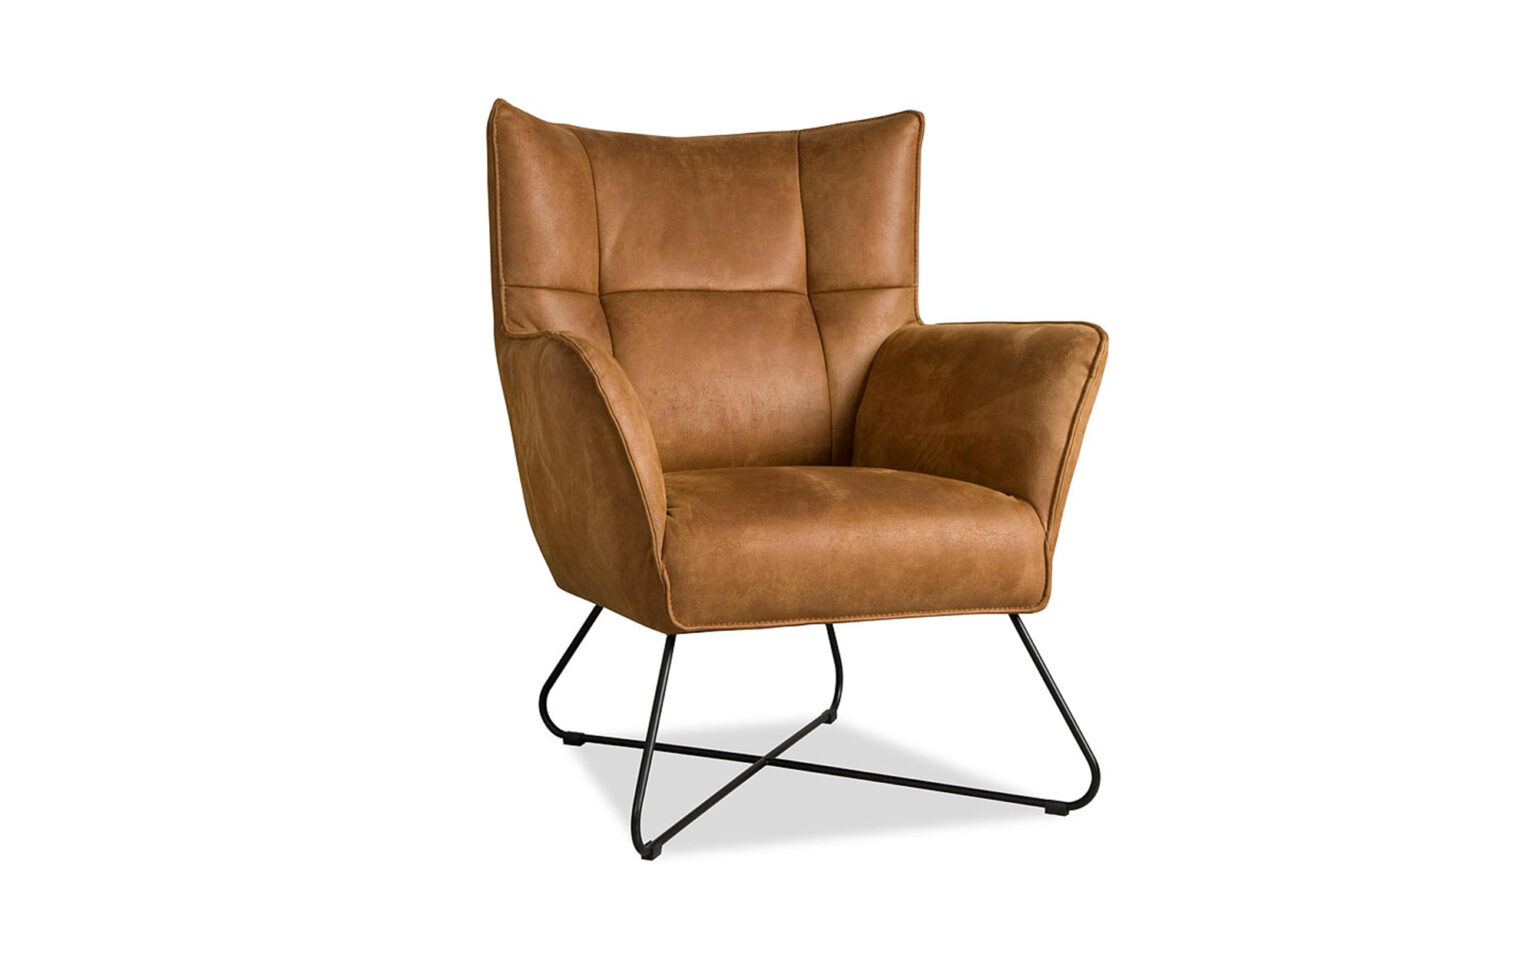 Max fauteuil